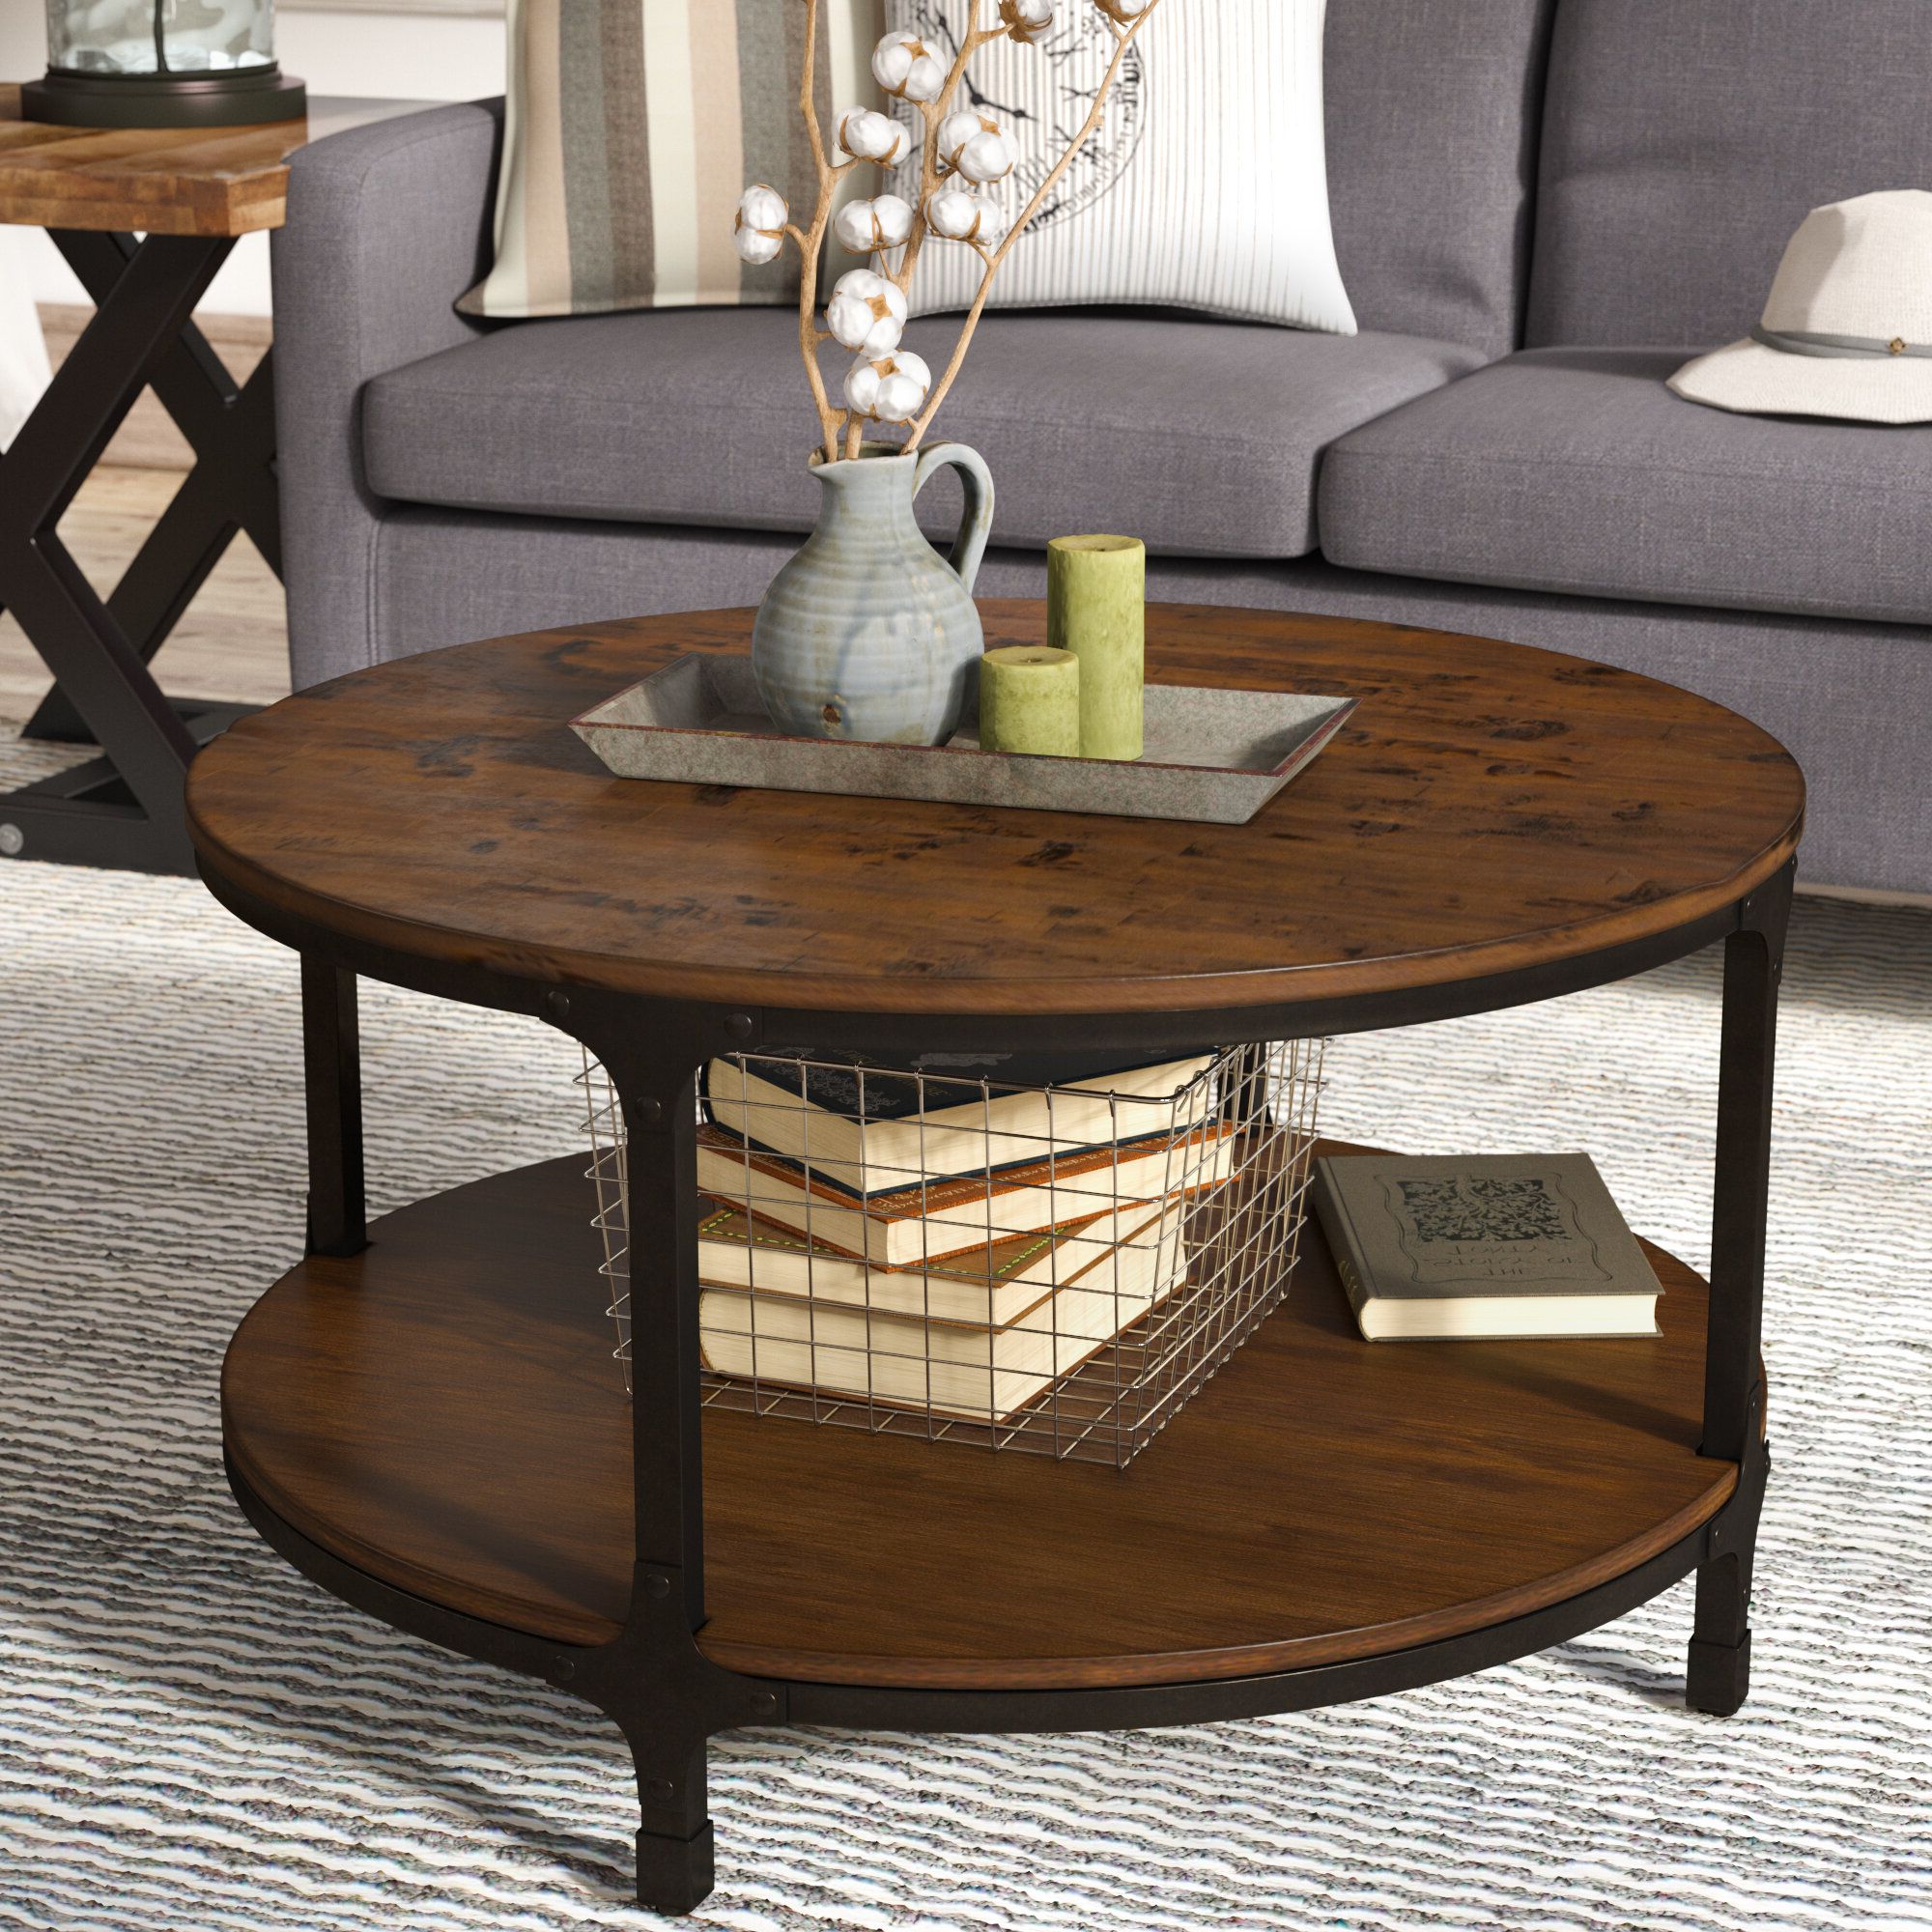 Modern Farmhouse Coffee Tables For Best And Newest Laurel Foundry Modern Farmhouse Carolyn Coffee Table & Reviews (View 15 of 15)